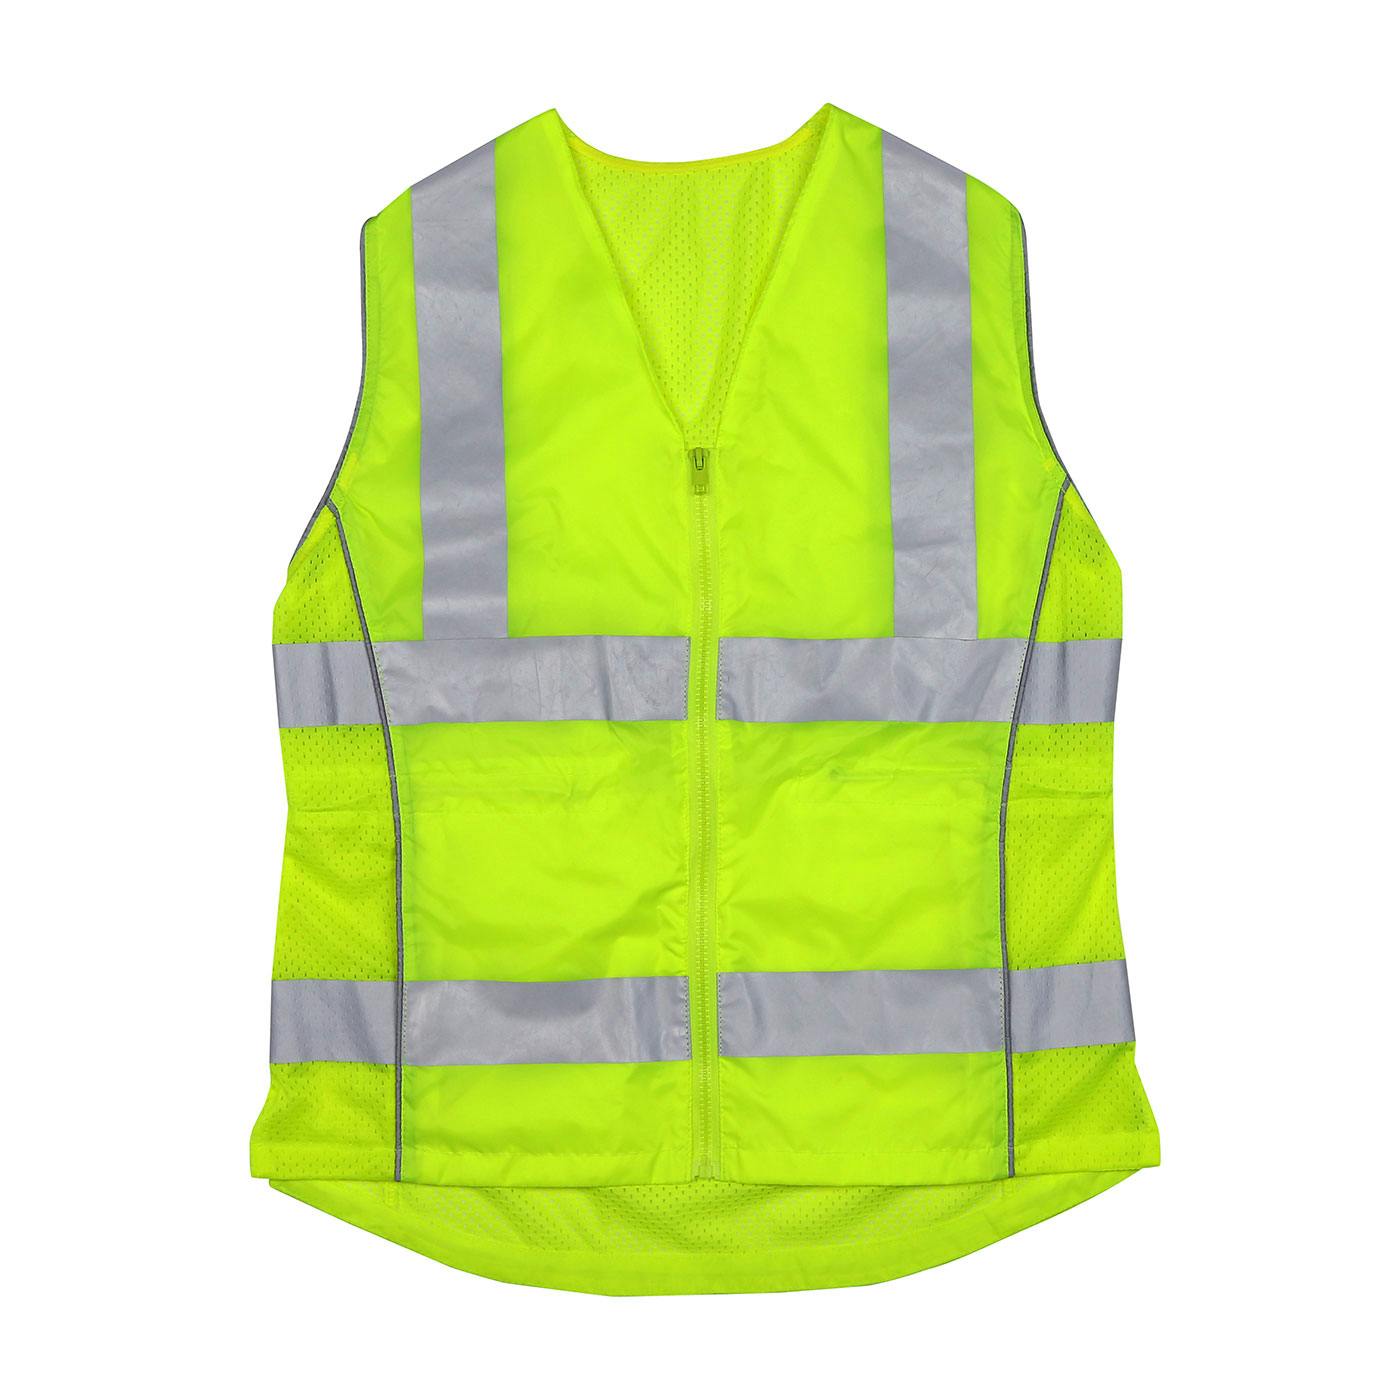 ANSI Type R Class 2 Women's Contoured Vest with Solid Front, Mesh Back and Adjustable Waist, Hi-Vis Yellow (302-0312)